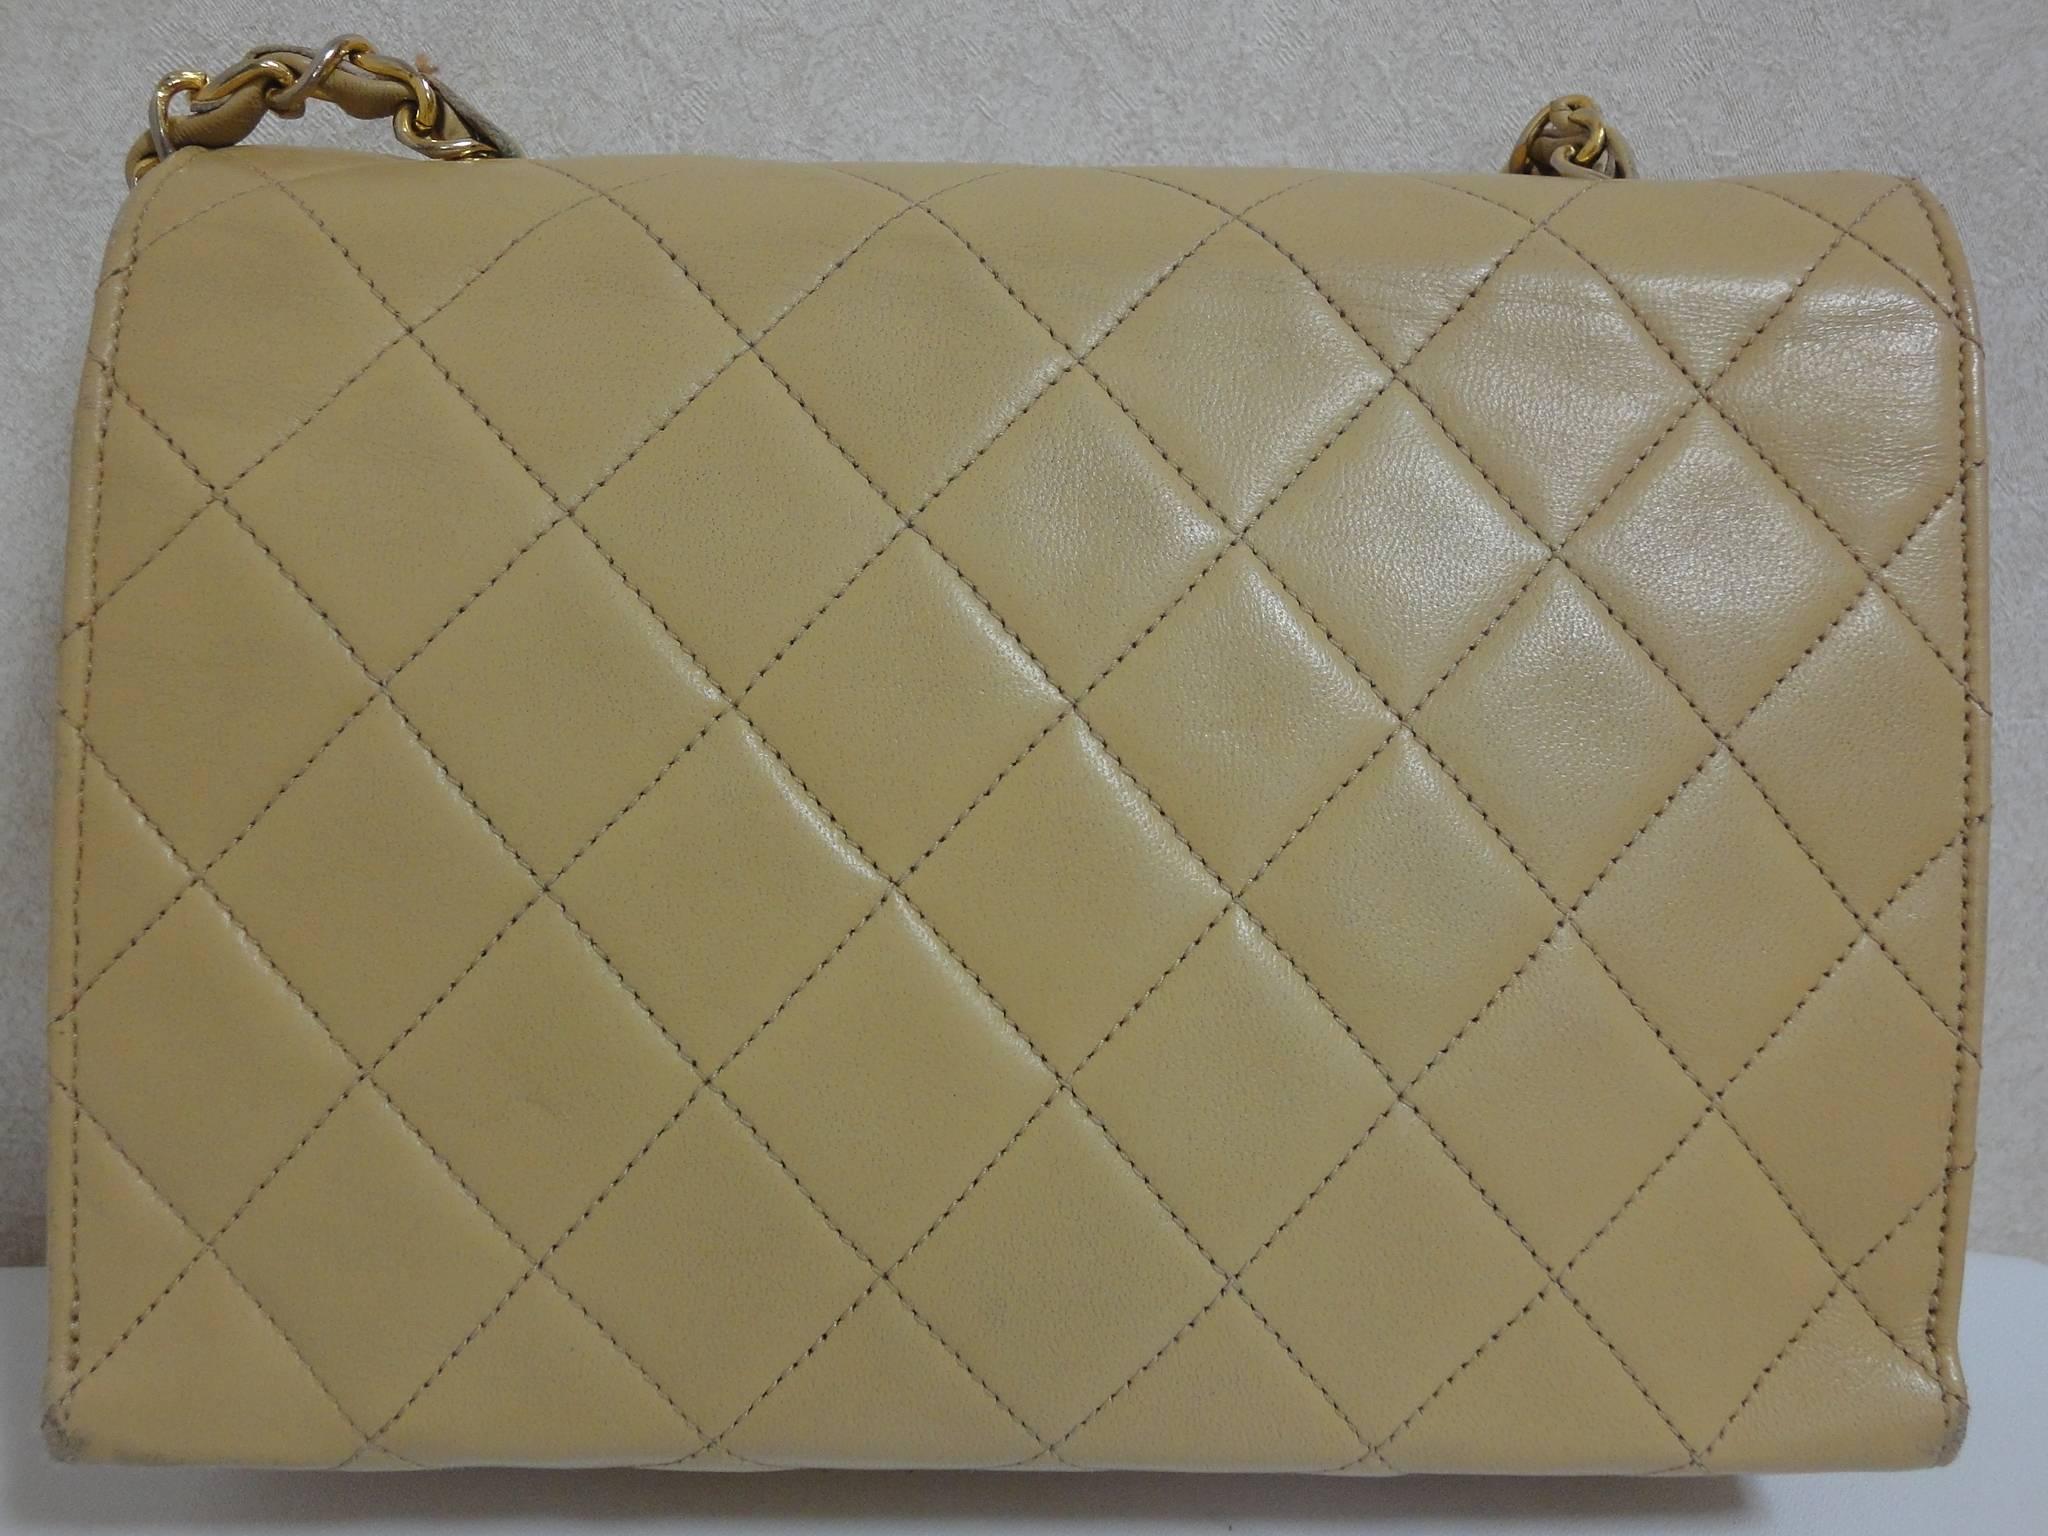 Brown 1980s Vintage CHANEL beige quilted lambskin chain shoulder purse with large CC